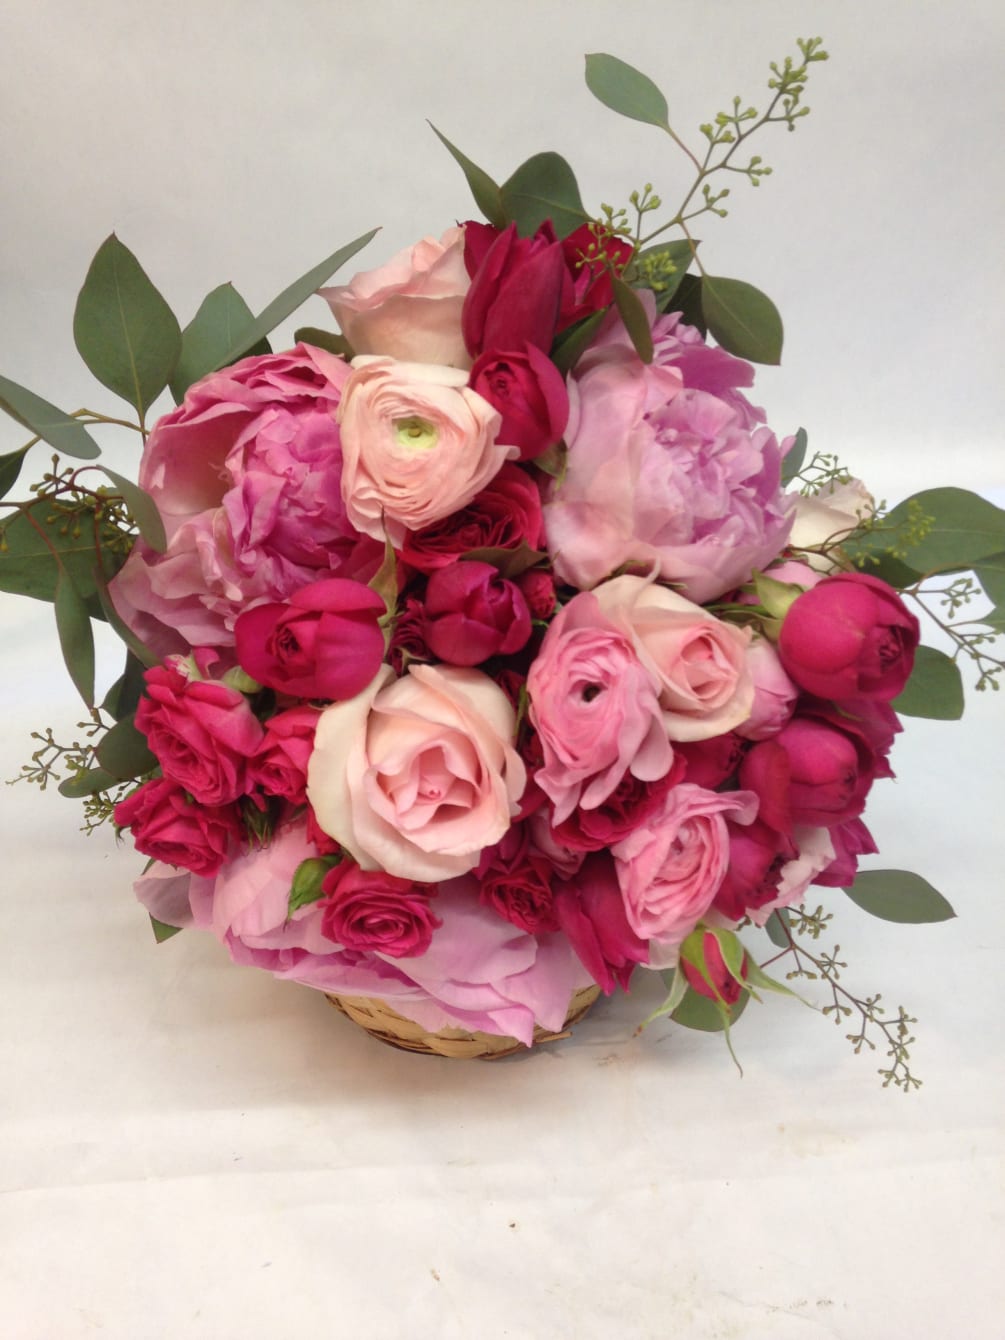 This mix of soft and hot pink flowers looks beautiful with white!